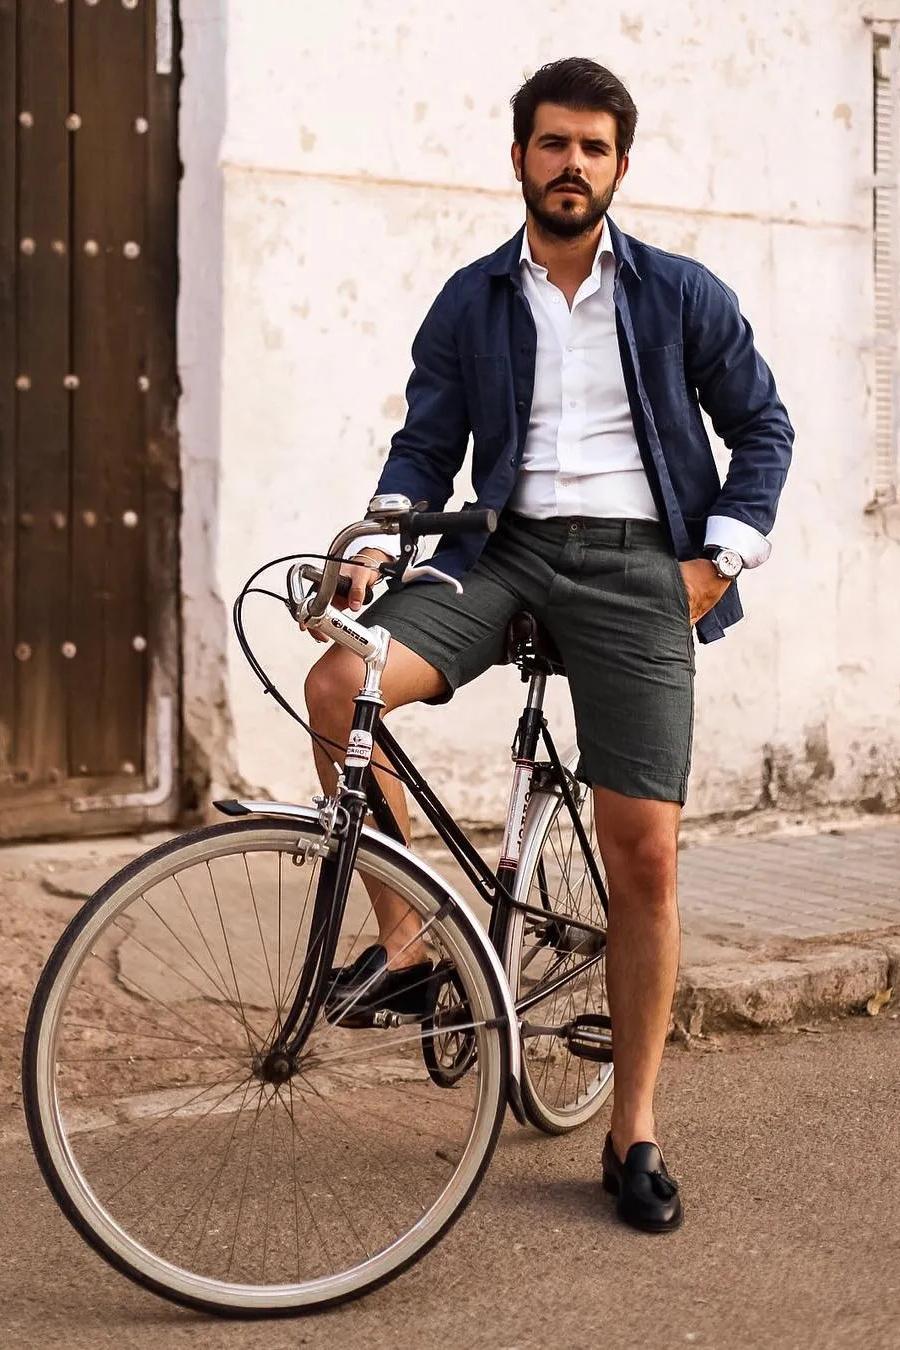 Wear a navy shirt jacket, white long-sleeve shirt, gray denim shorts, and black loafers